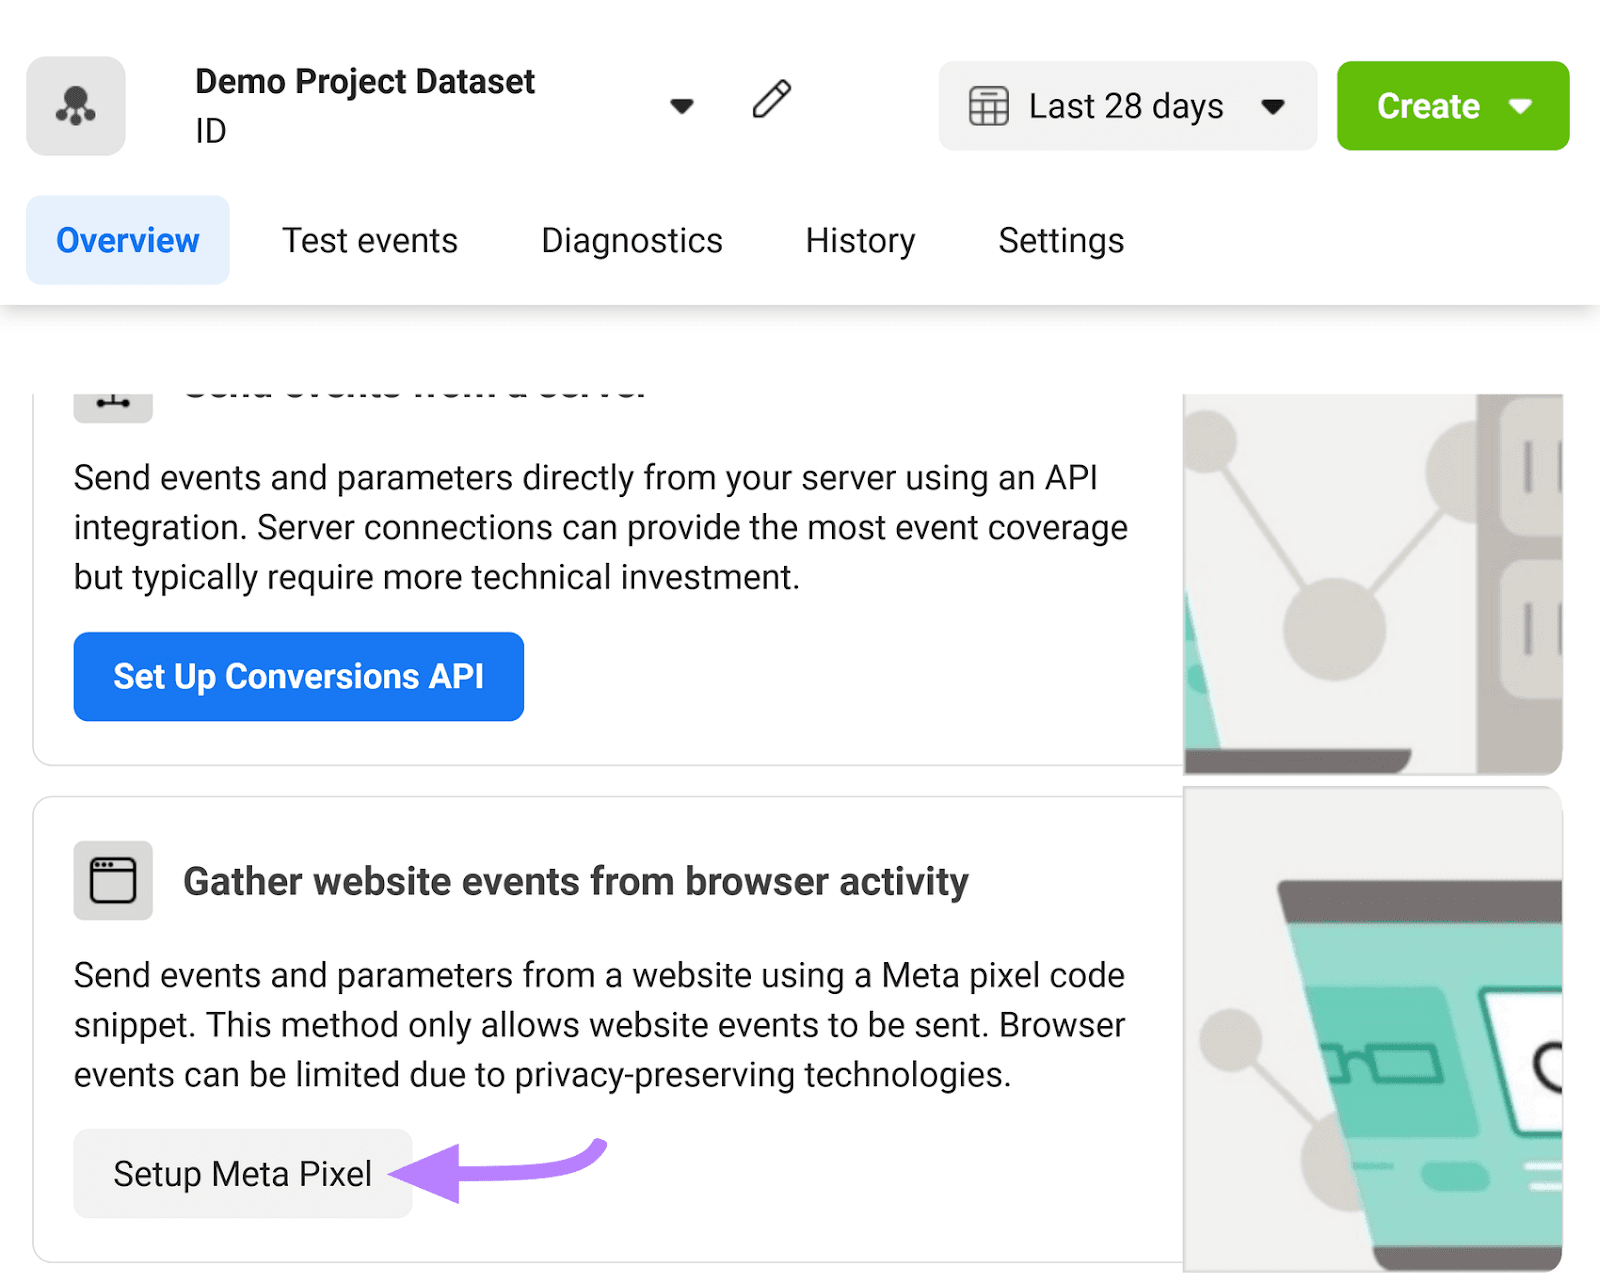 “Setup Meta Pixel” button highlighted under “Gather website events from browser activity” module